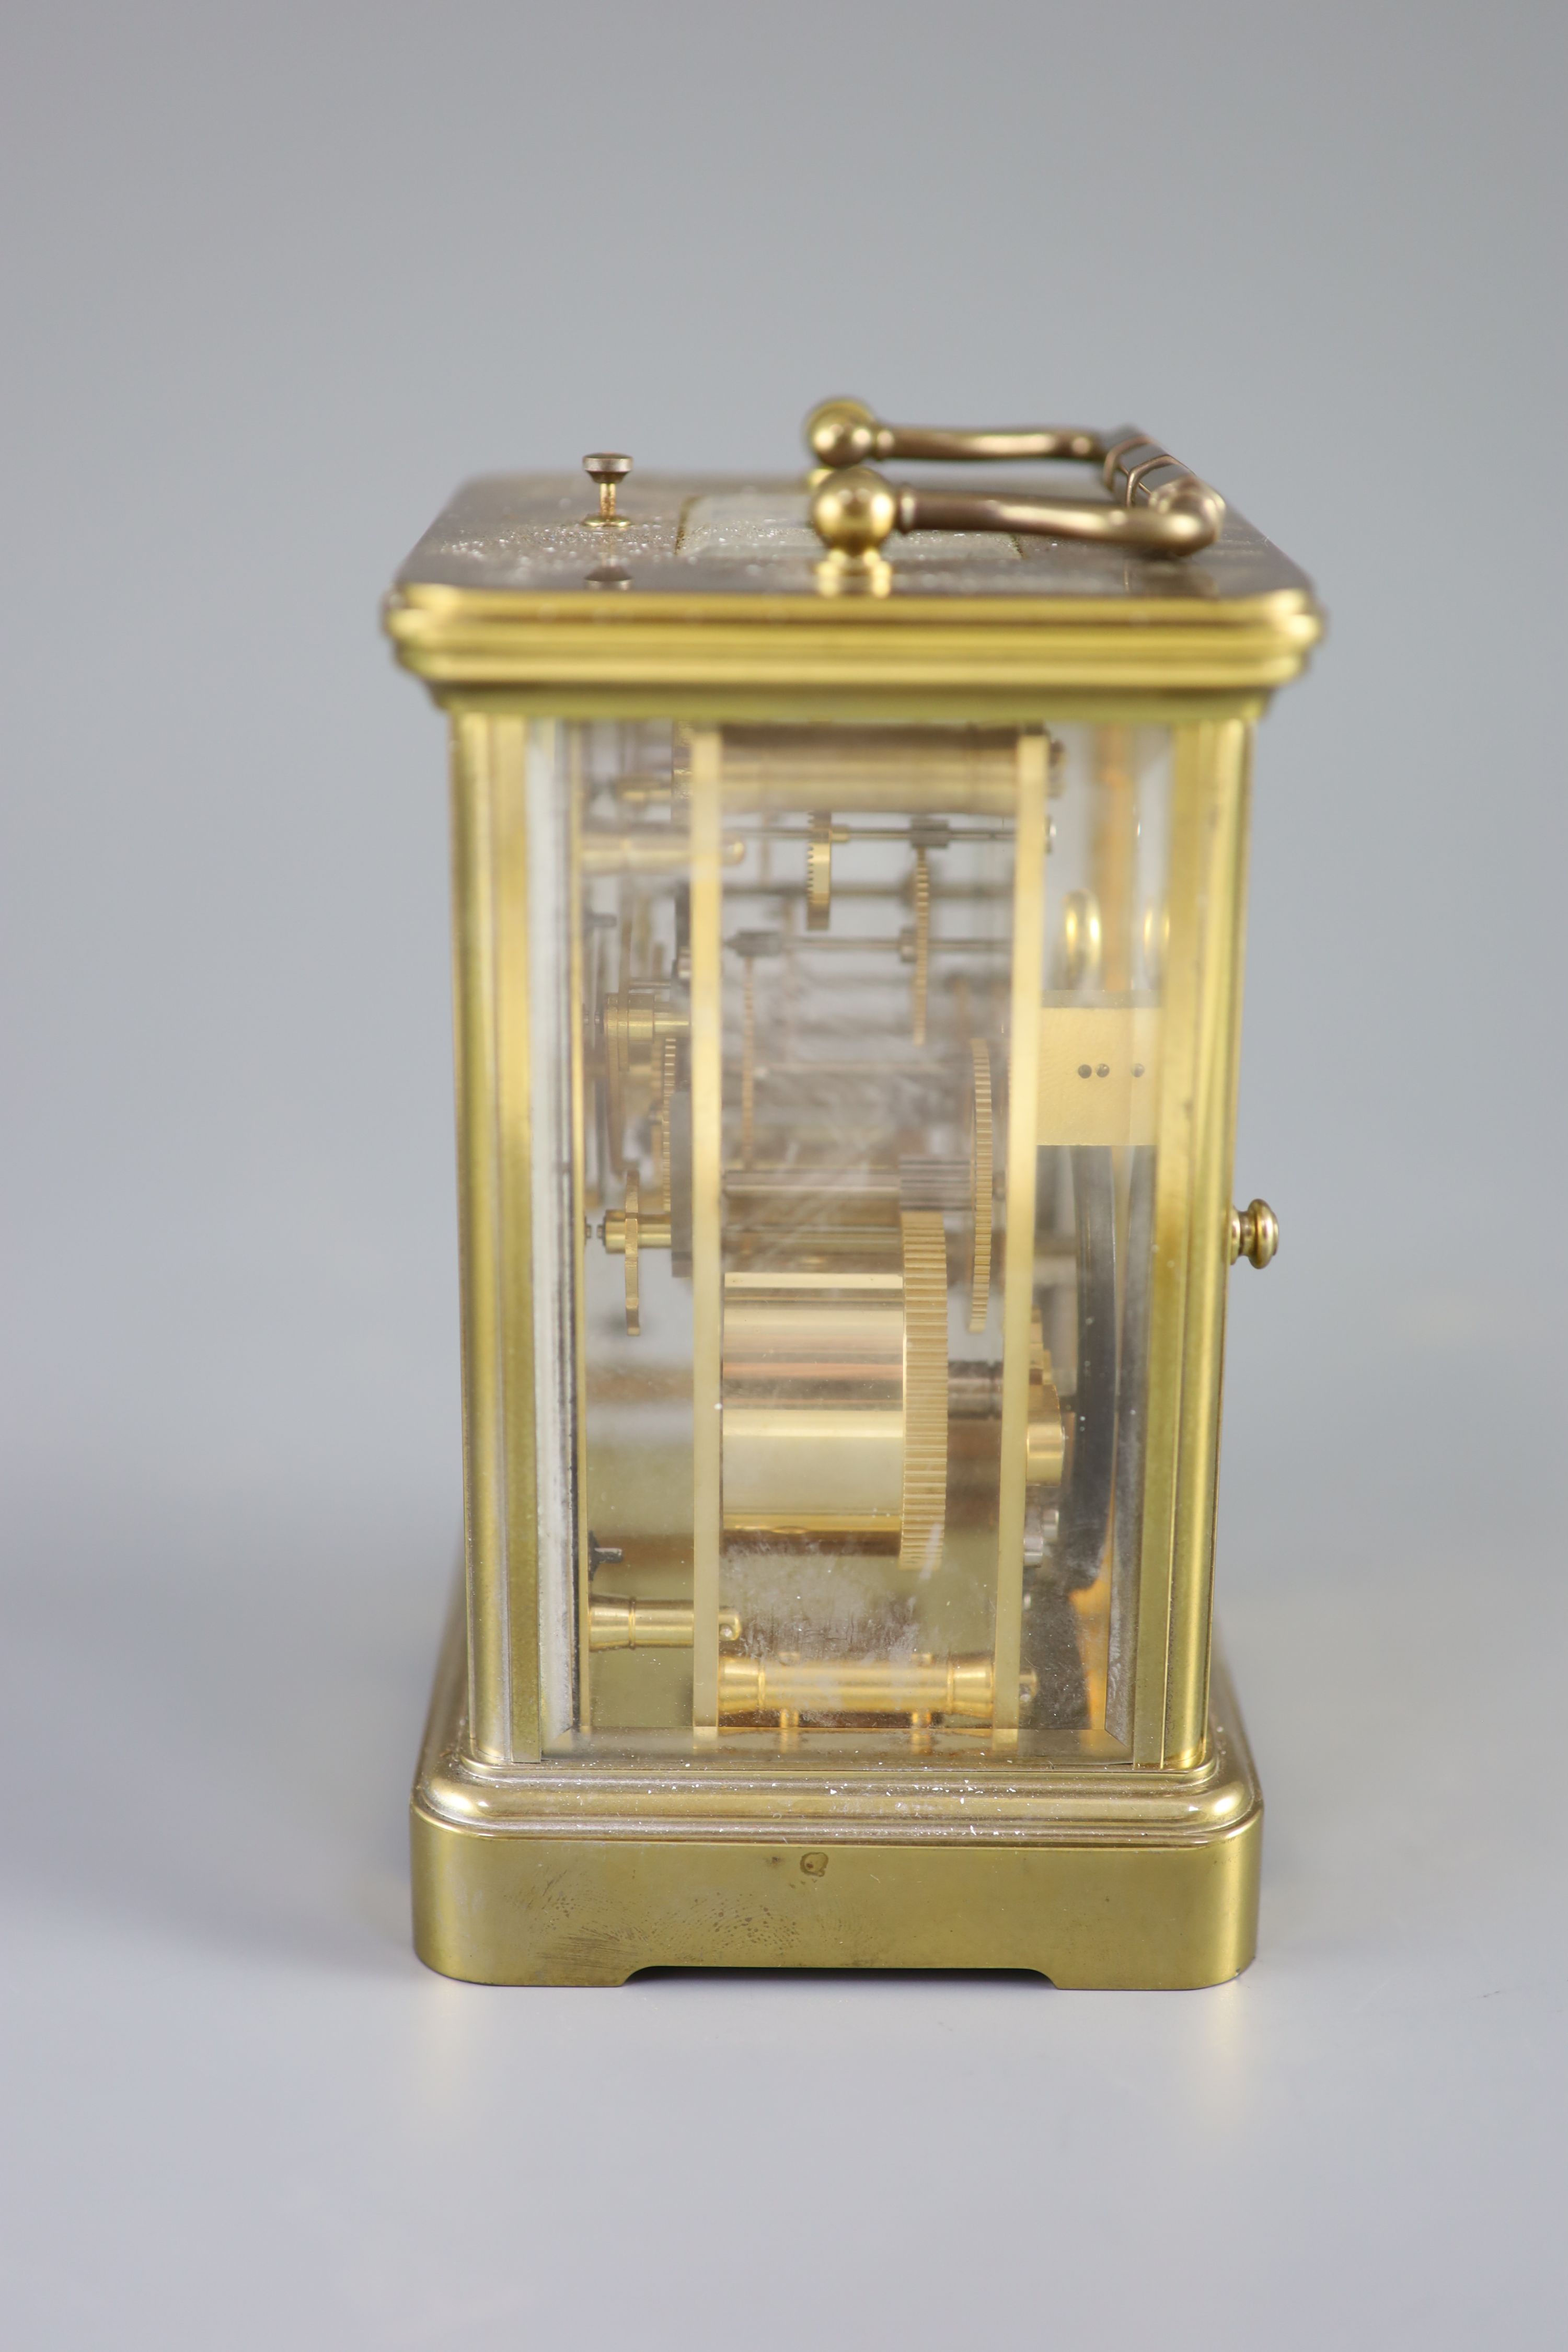 A large Swiss-made brass carriage clock, Matthew Norman, London, 20th centuryNo 1751A, white dial - Image 3 of 5